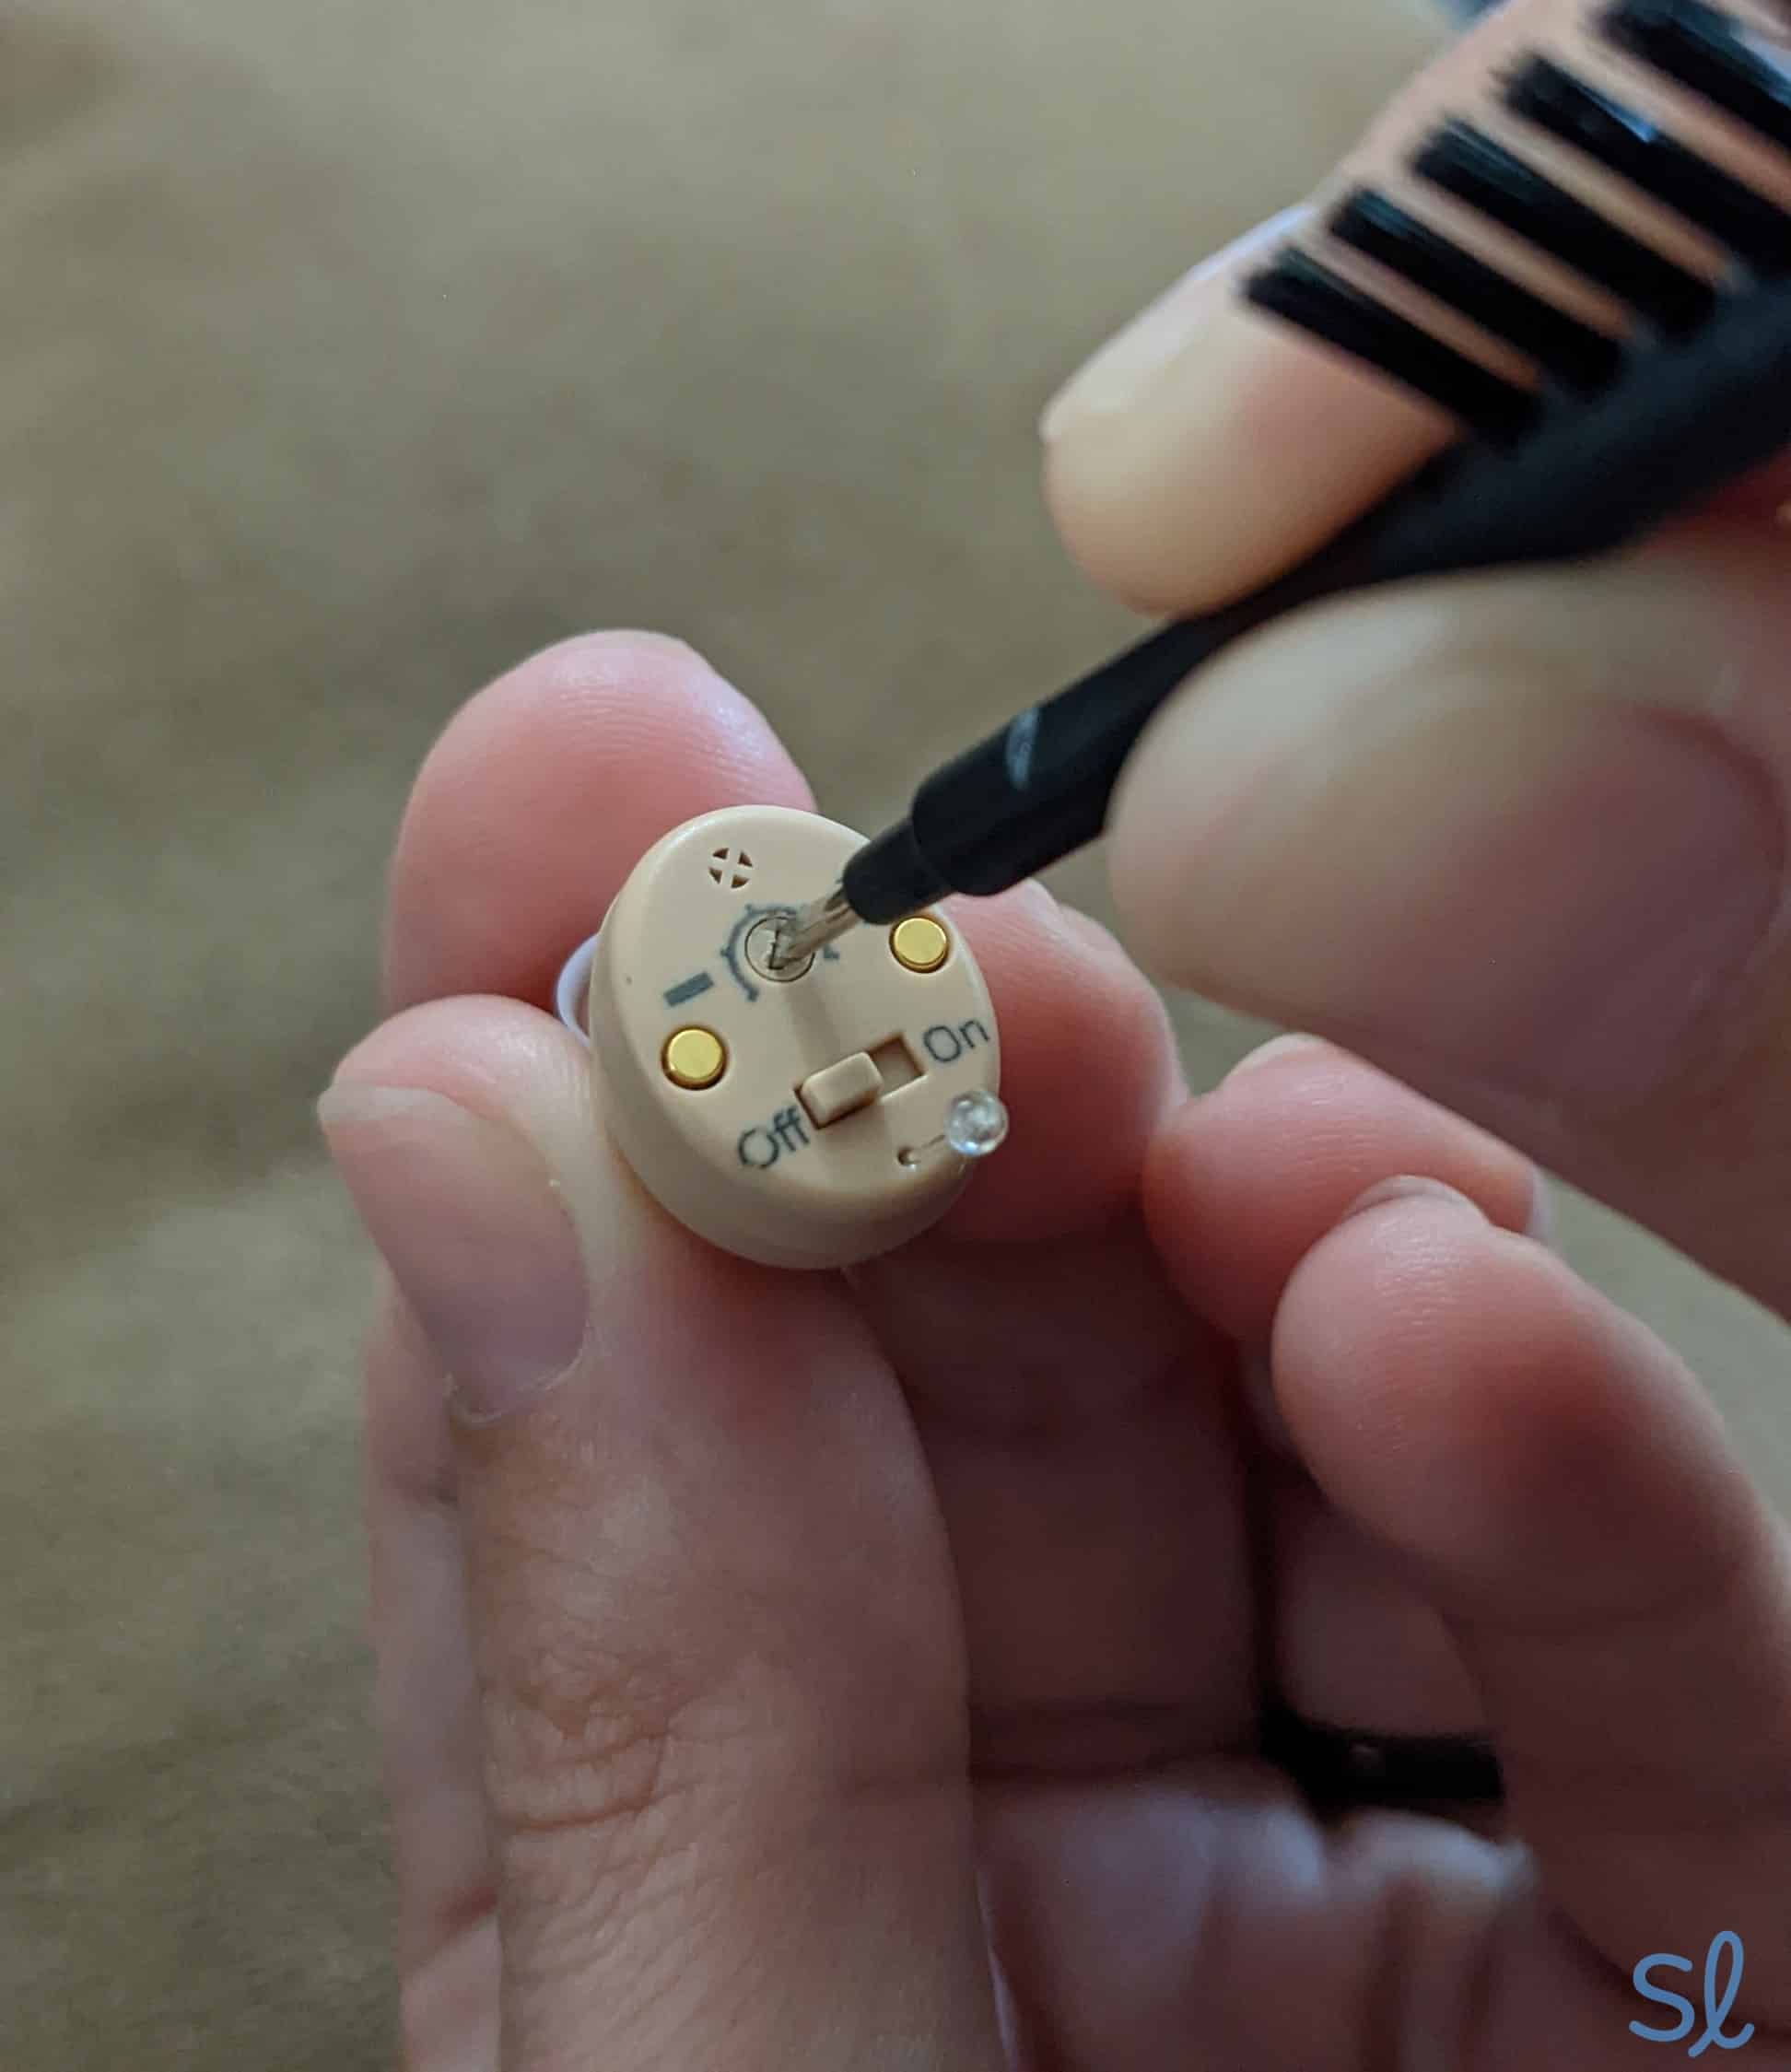 Adjusting the volume on the Atom hearing aid.